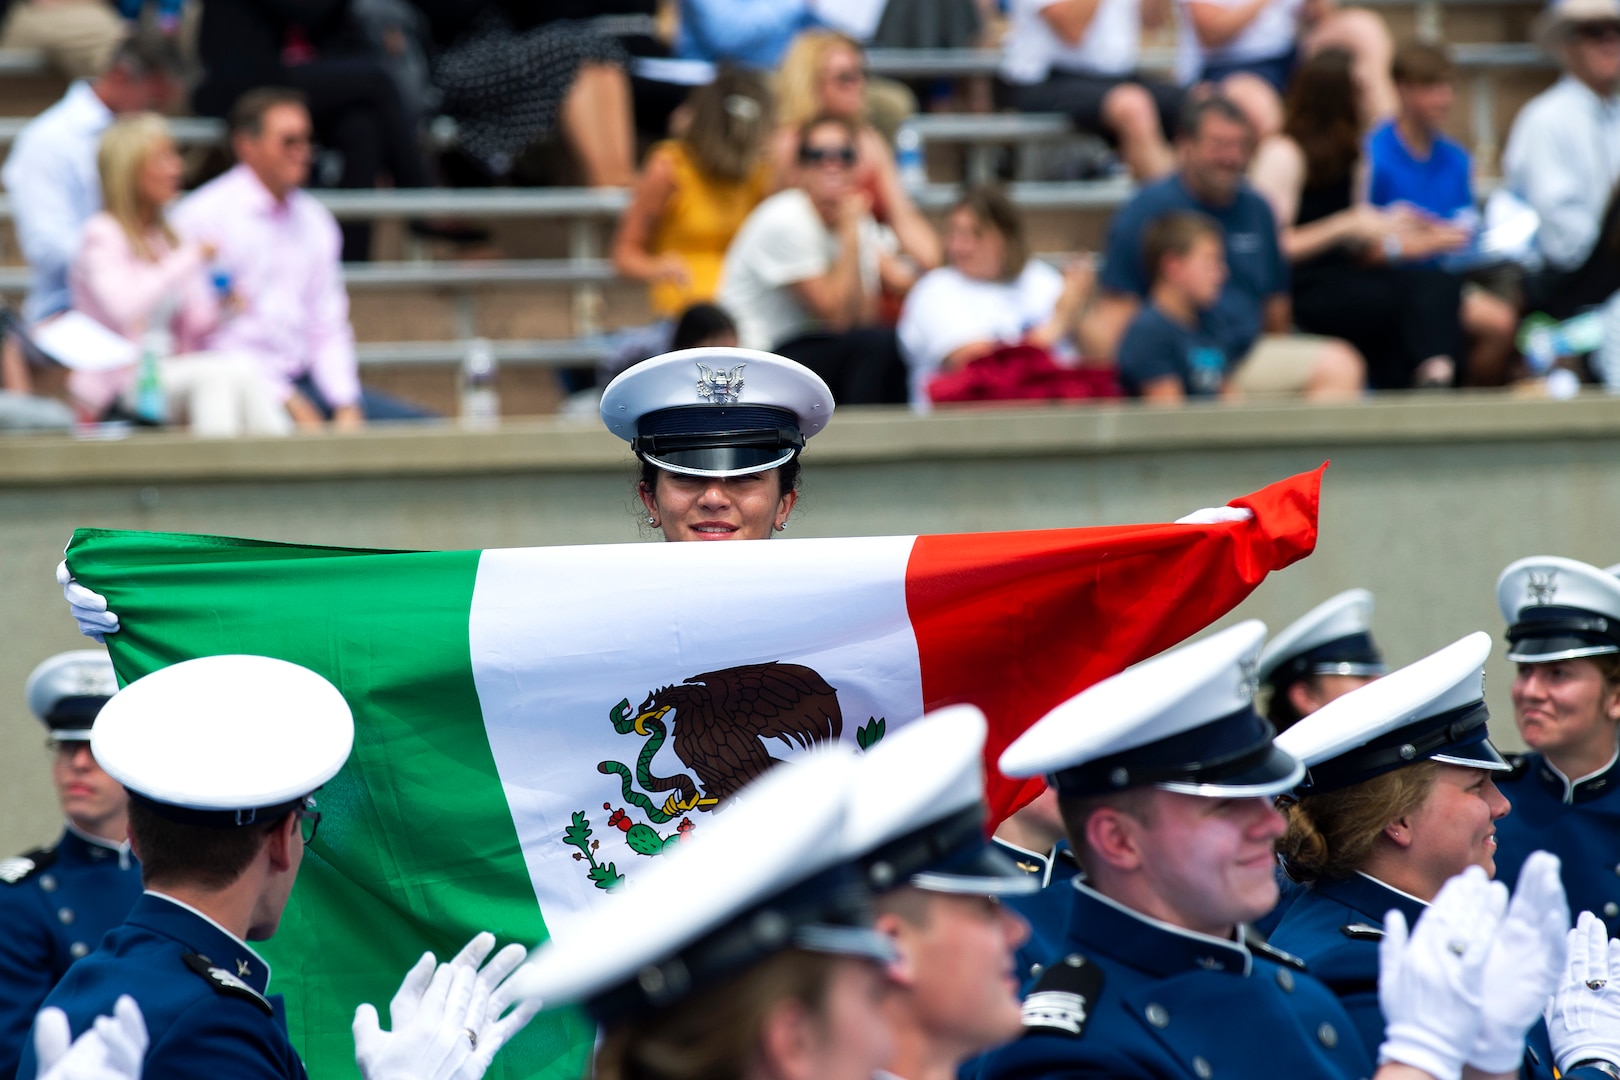 Mexican Navy Cadet Itzel Sinai Chan Topete proudly displays the Mexican flag during a graduation ceremony at the U.S. Air Force Academy, Colorado Springs, Colo., May 26, 2021.